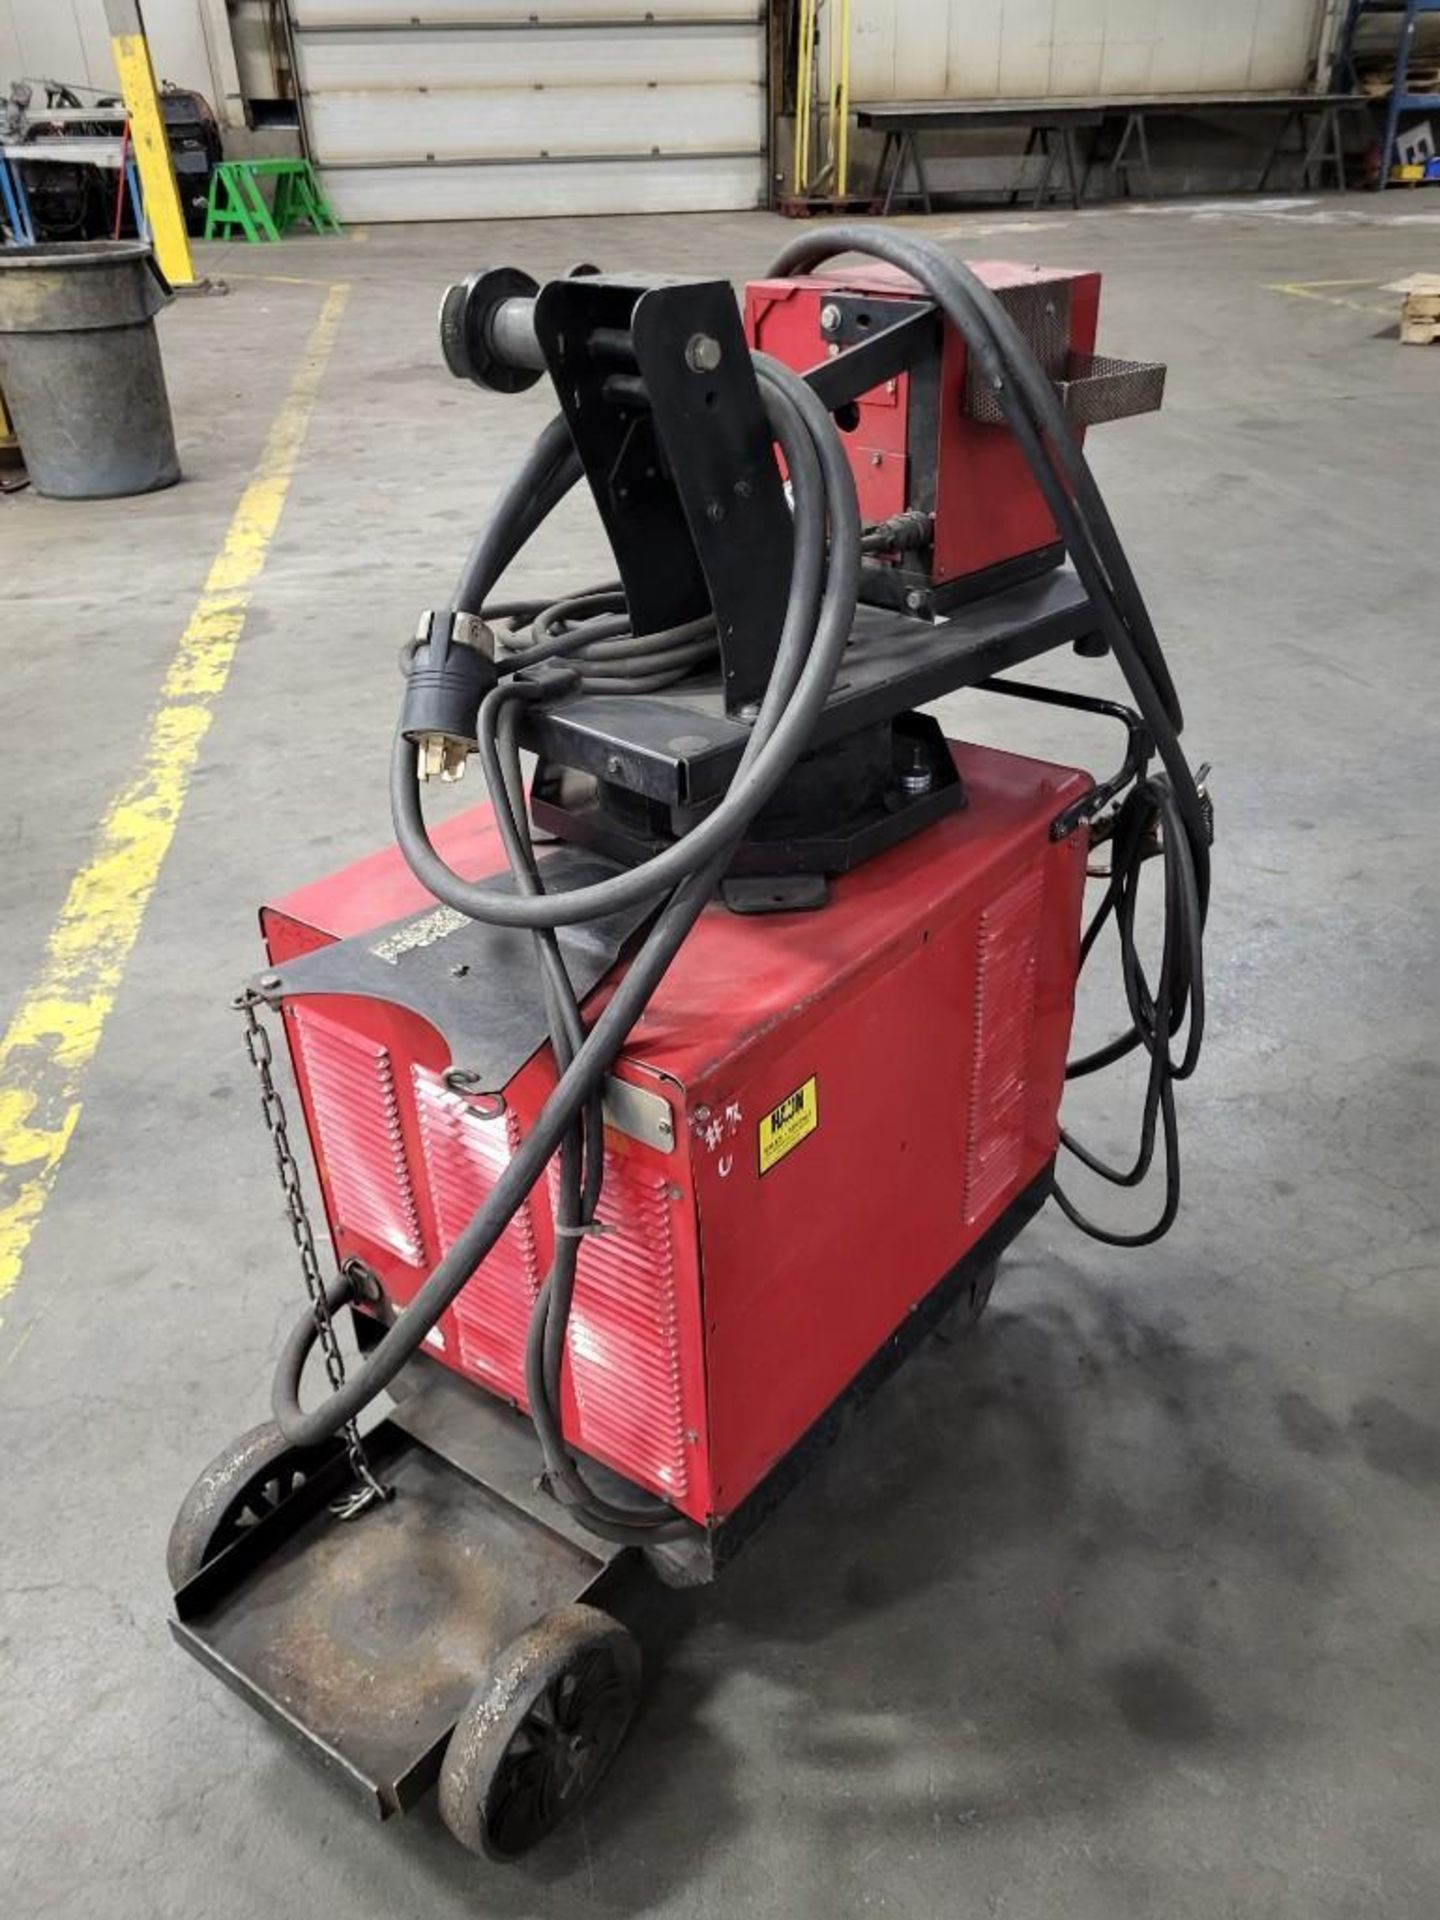 LINCOLN ELECTRIC CV-300 MIG WELDER WITH LN-7 WIRE FEEDER - Image 4 of 9